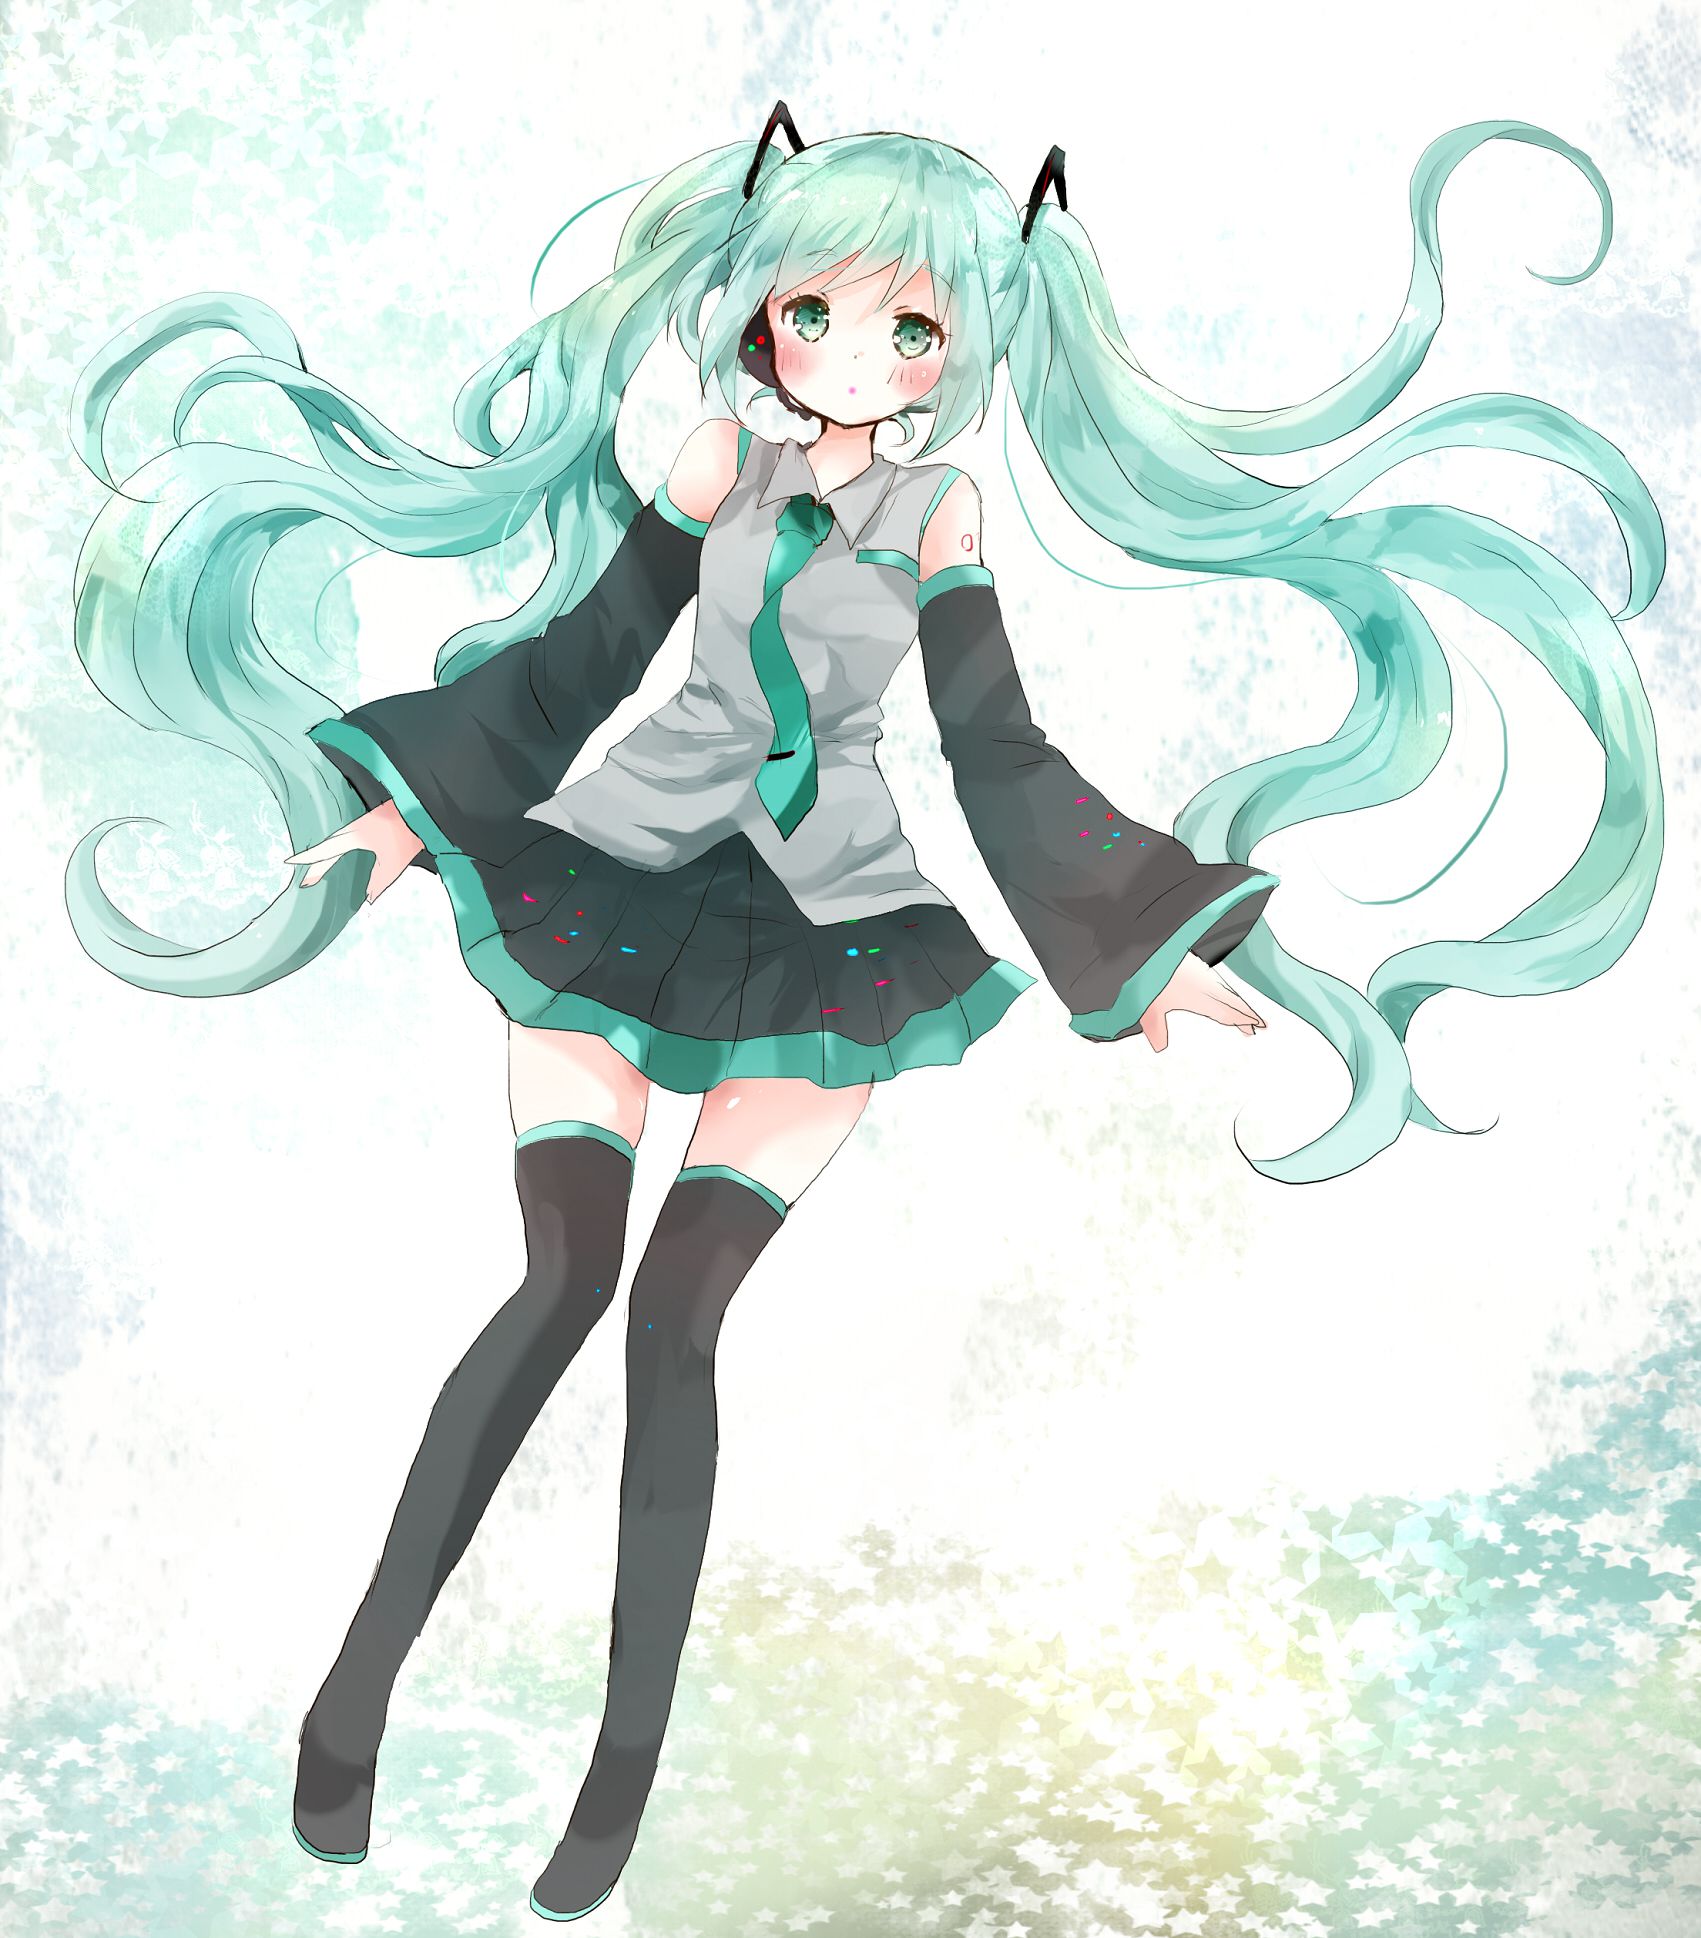 Assorted Miku images after a long absence. 9